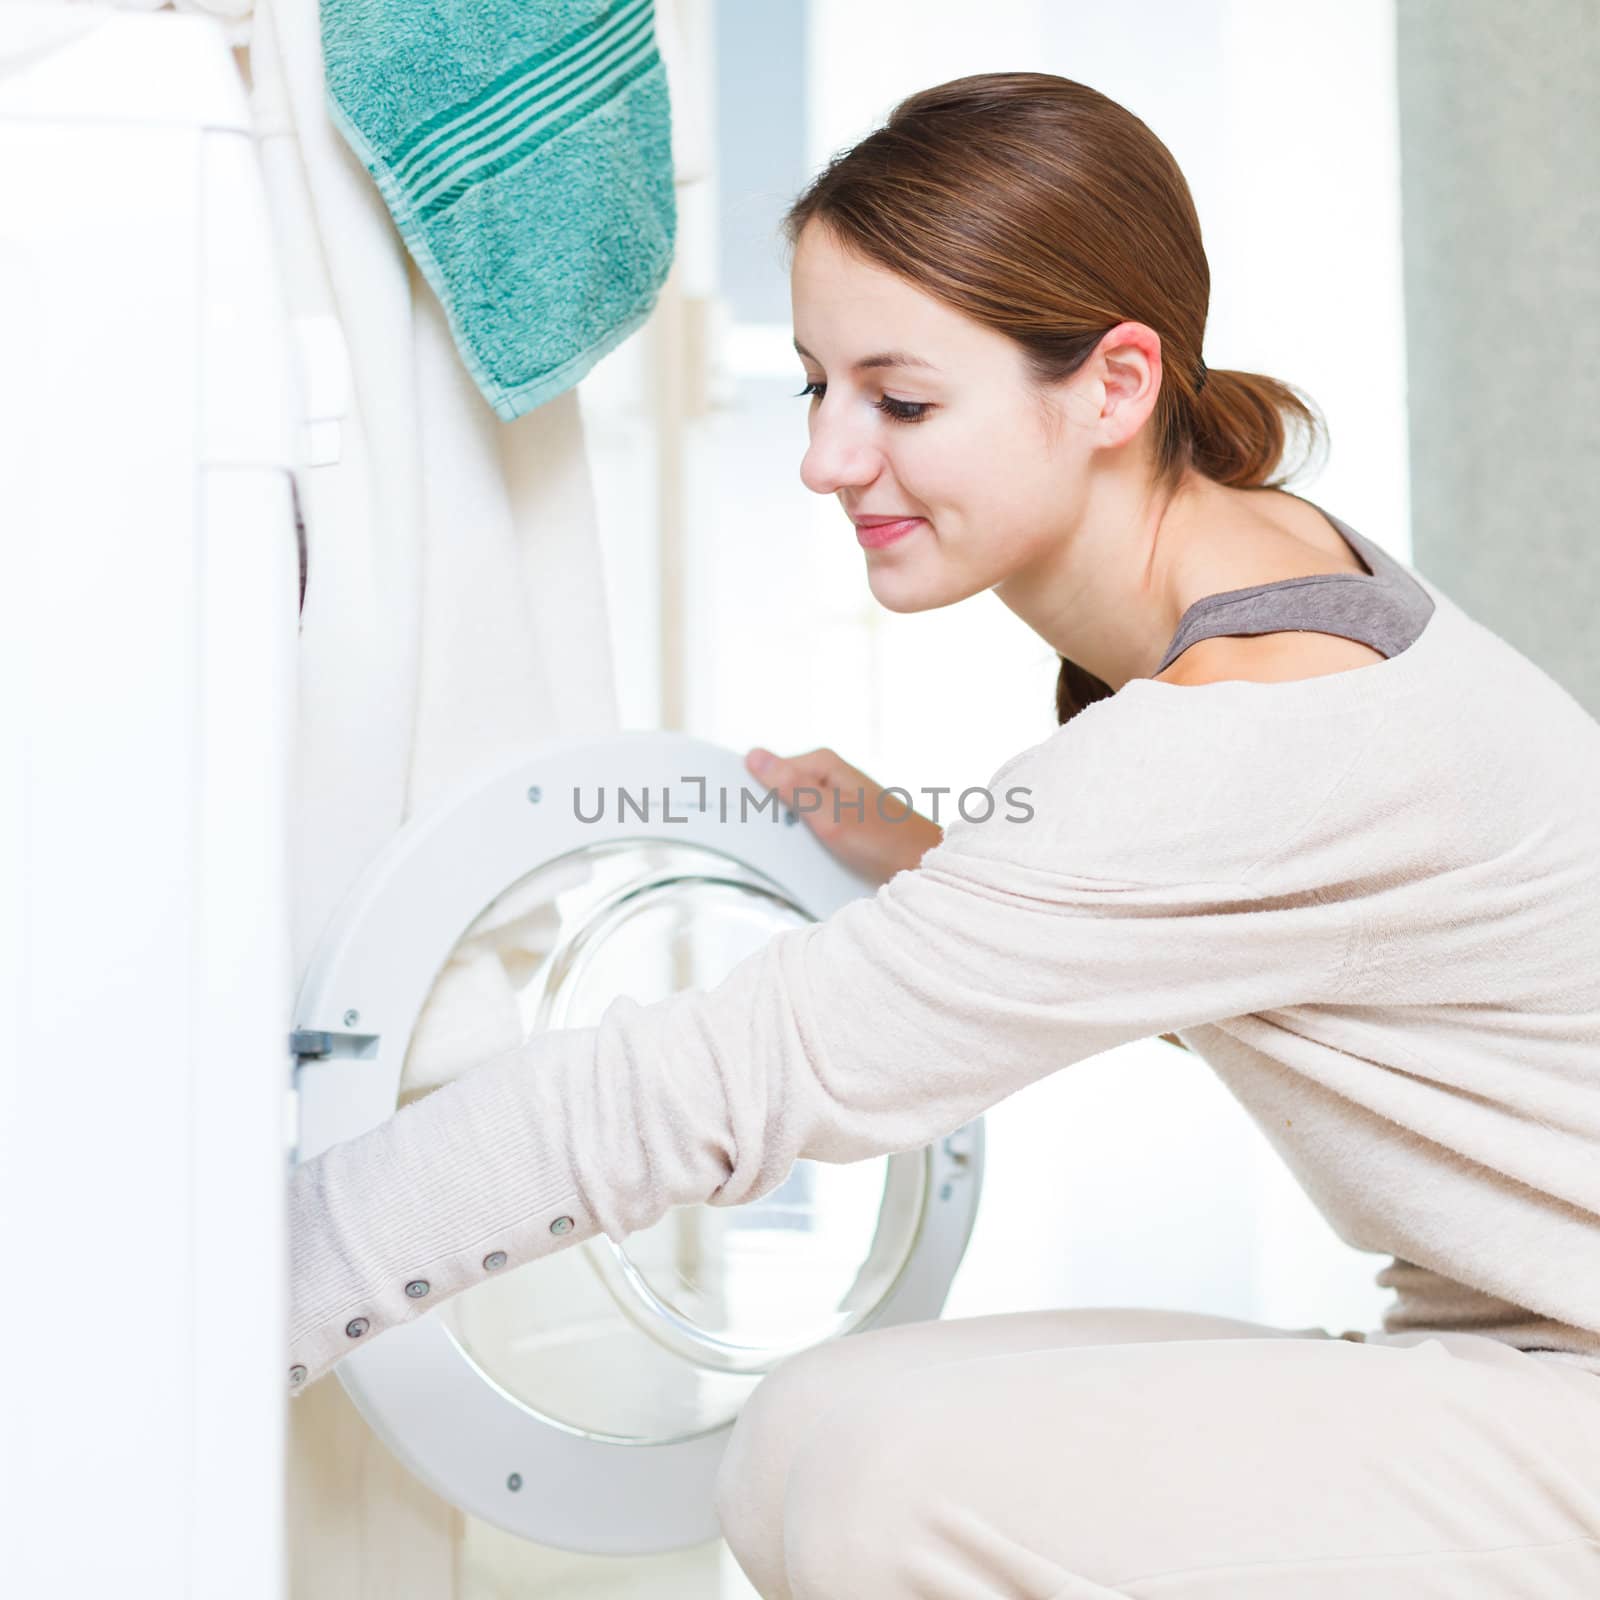 Housework: young woman doing laundry by viktor_cap